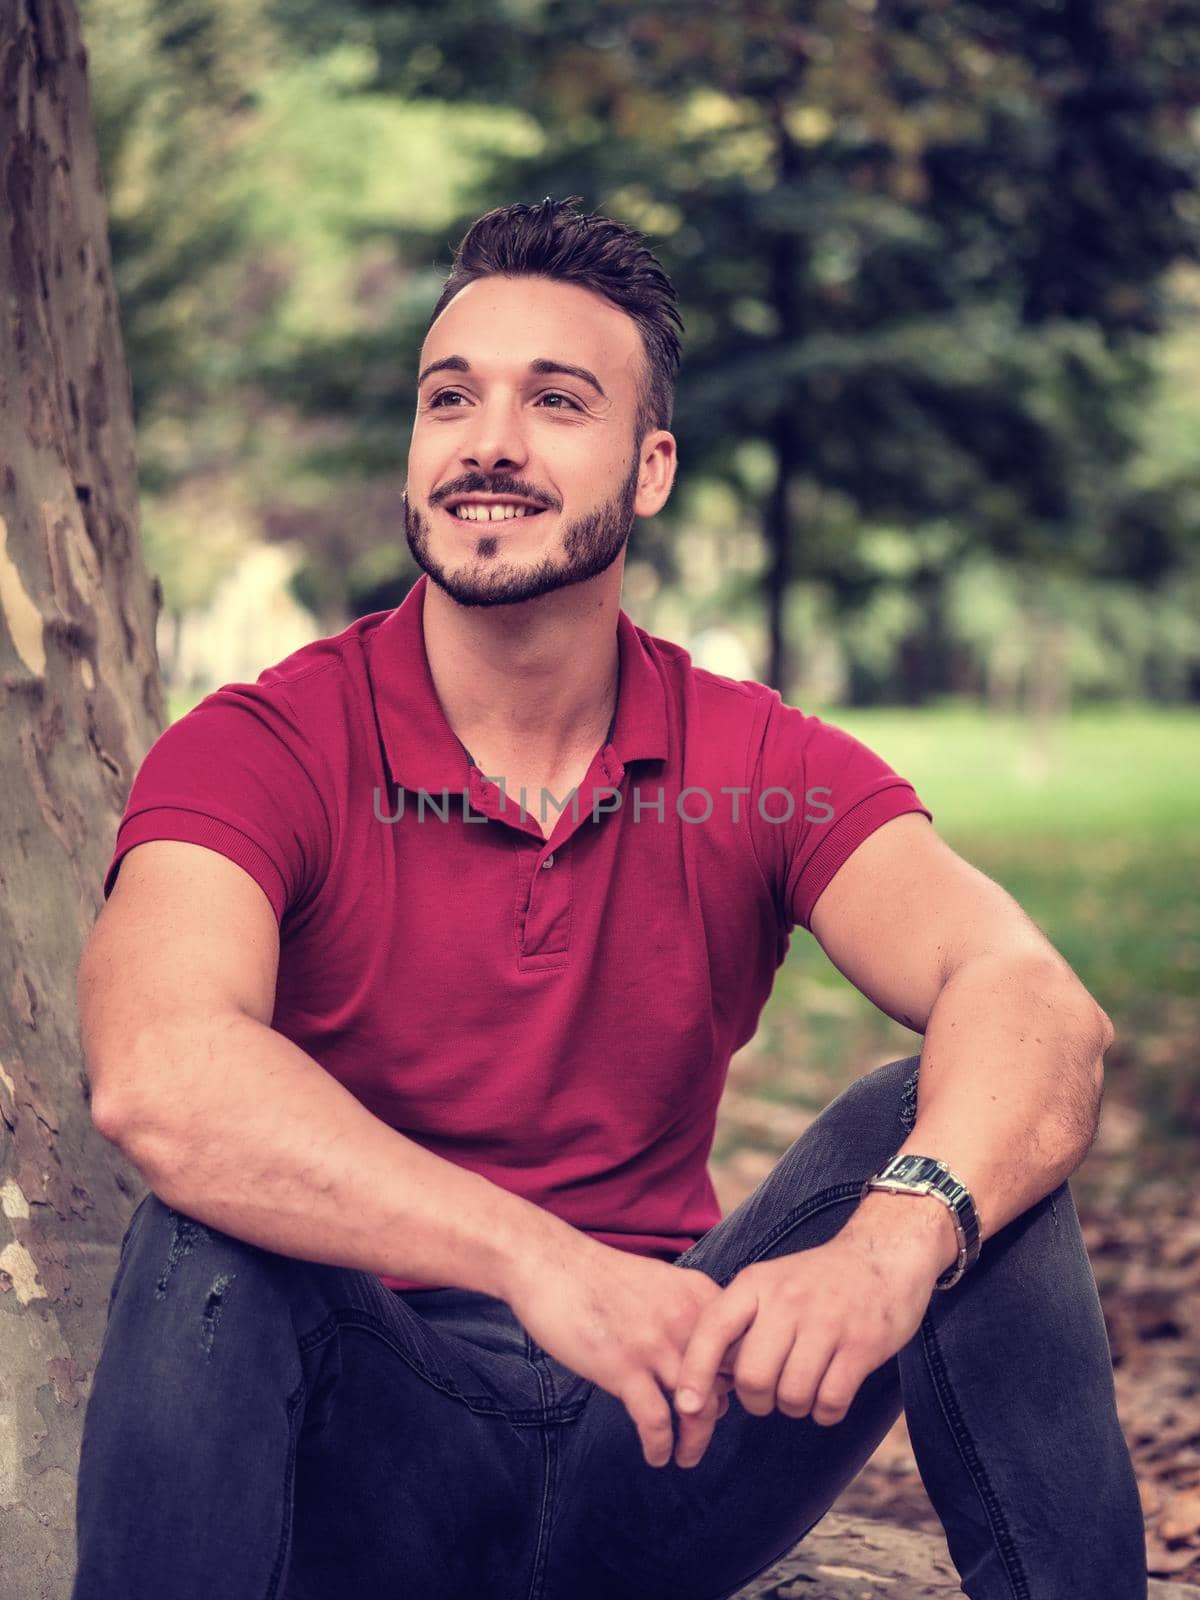 Attractive young man in park resting or relaxing against tree, in a sunny summer day